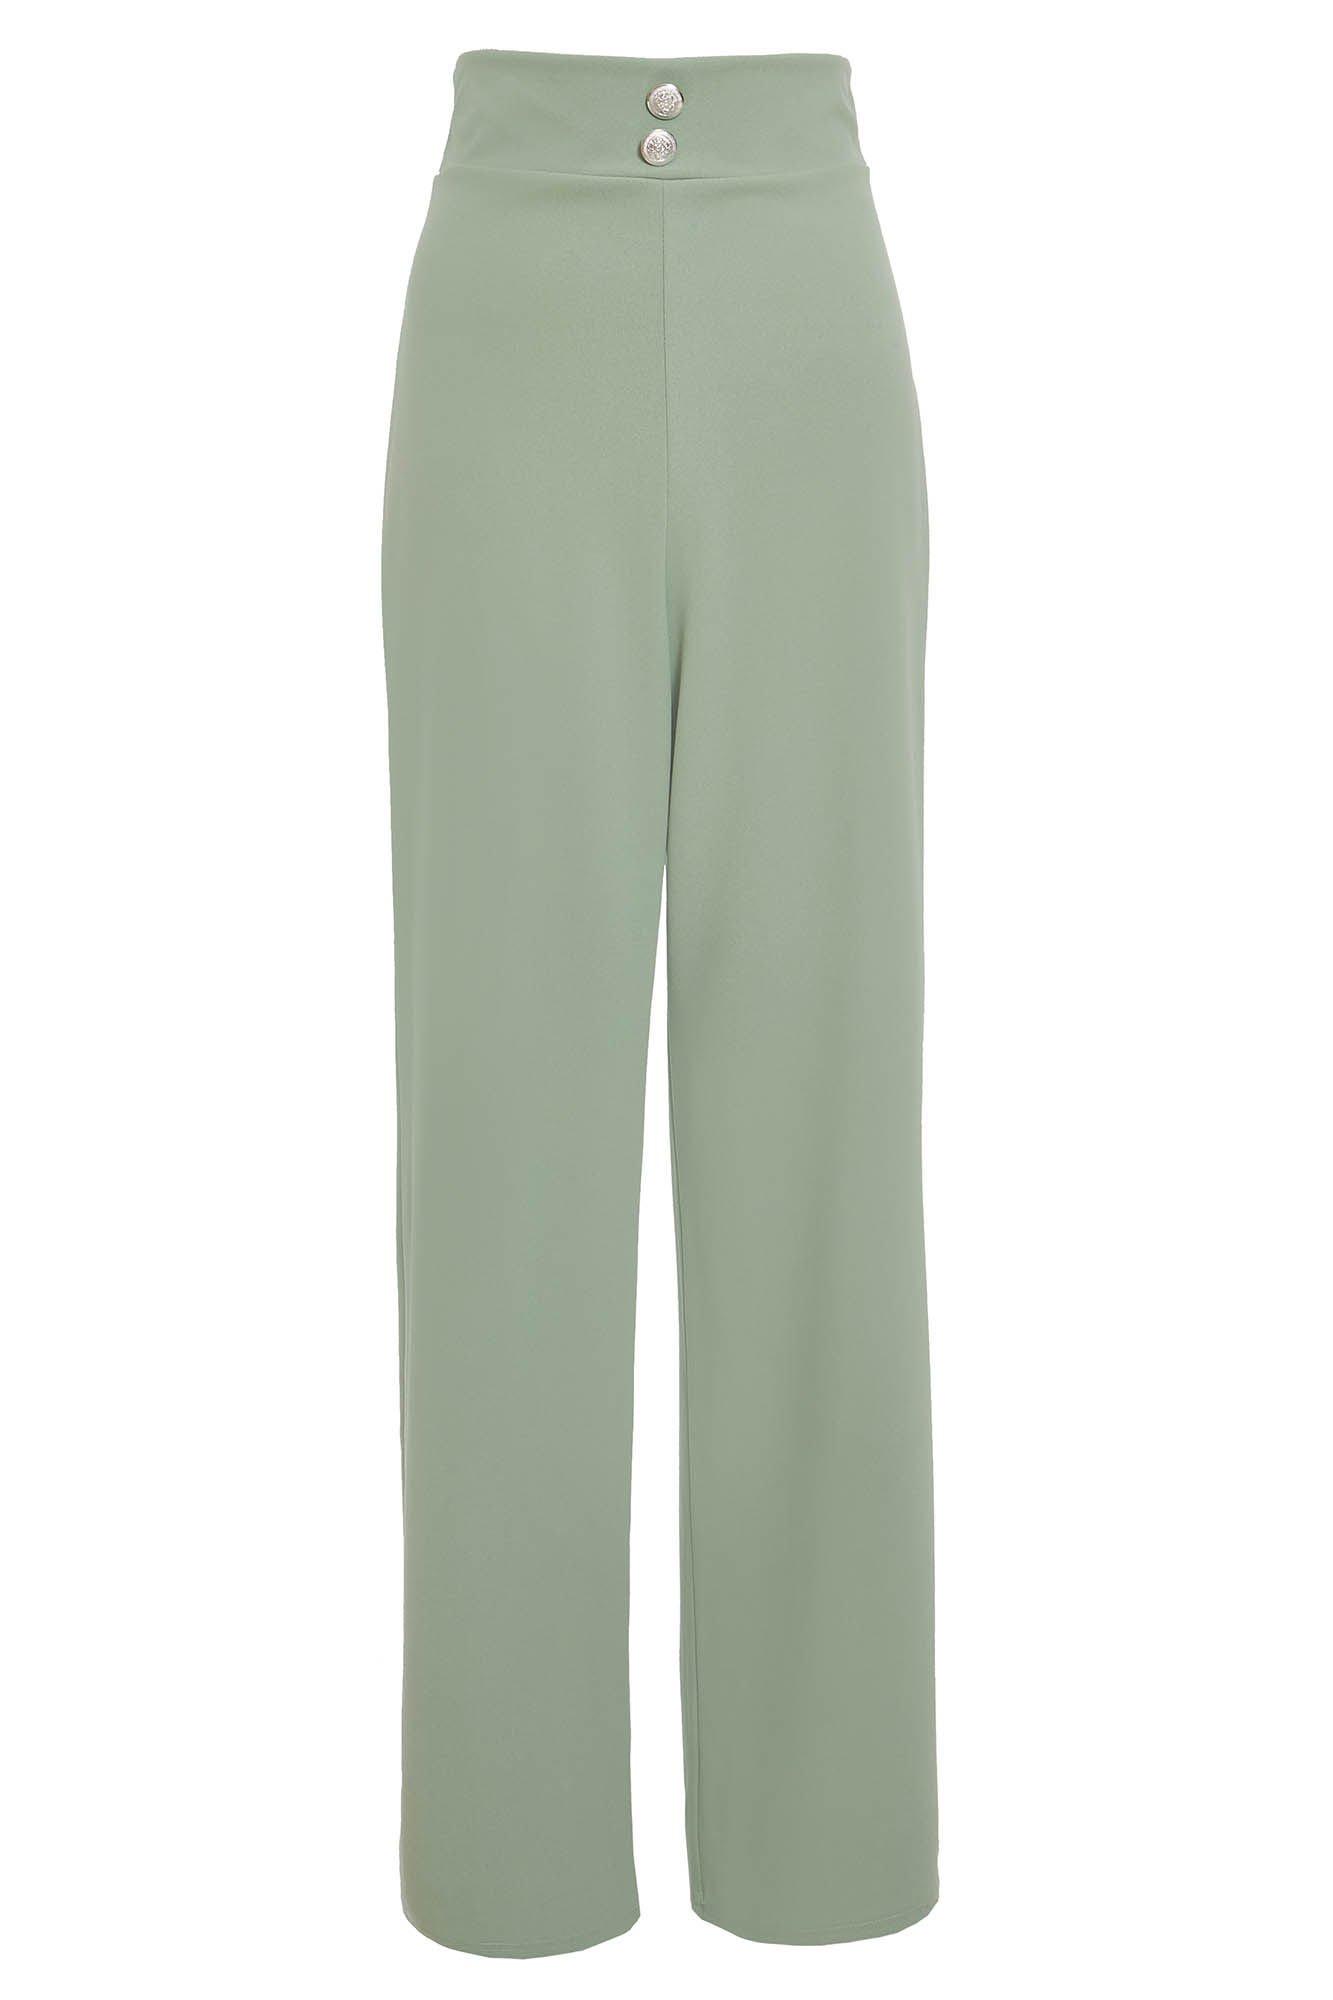 Sage Green High Waist Palazzo Trousers - Quiz Clothing